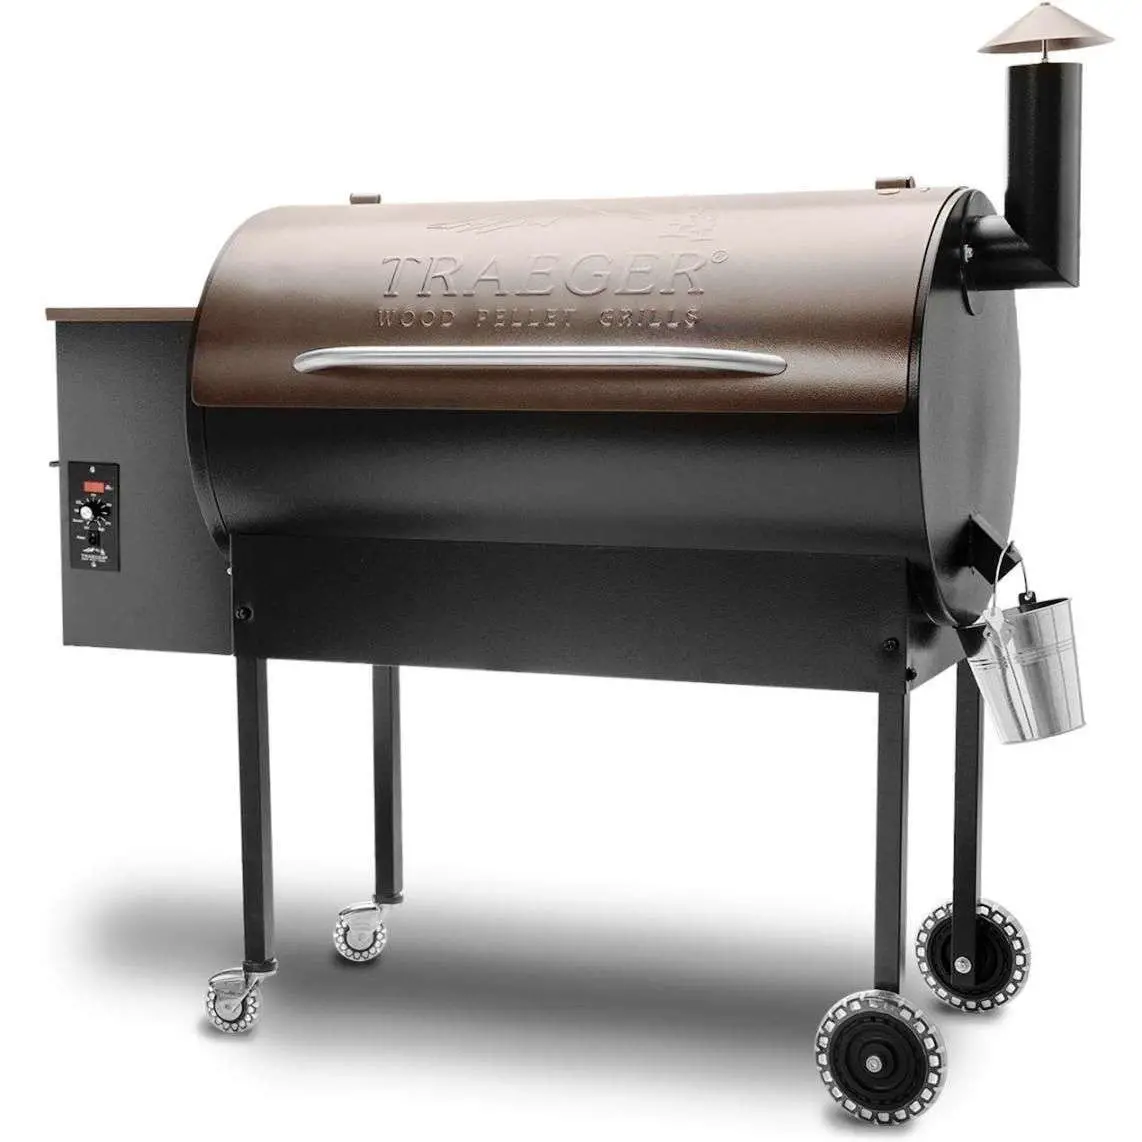 Traeger Pro Series 34 Pellet Grill Review